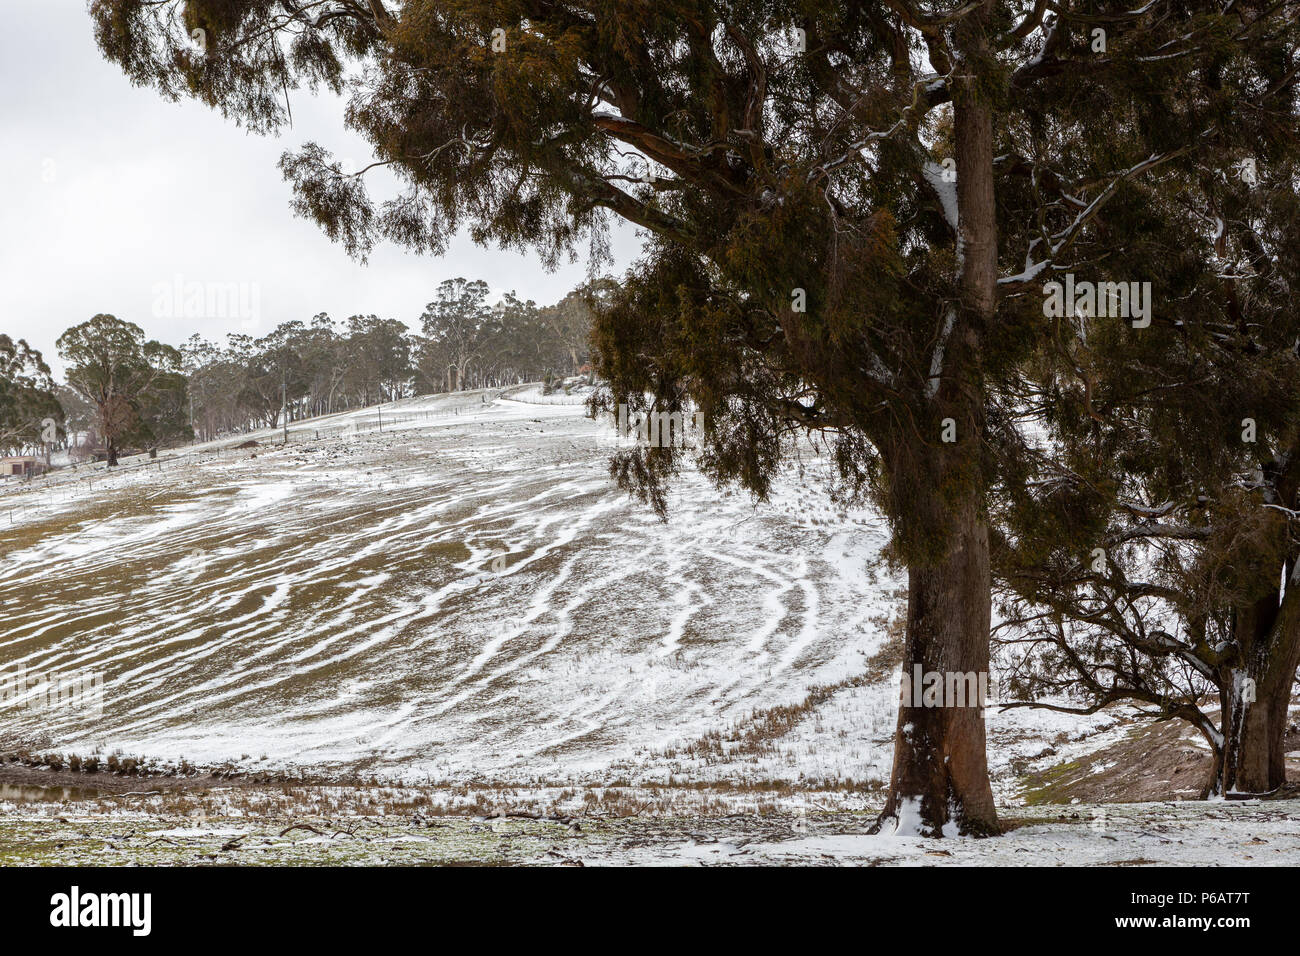 Snow covering a hillside with trees and cattle tracks in Oberon New South Wales Australia on 17th June 2018 Stock Photo